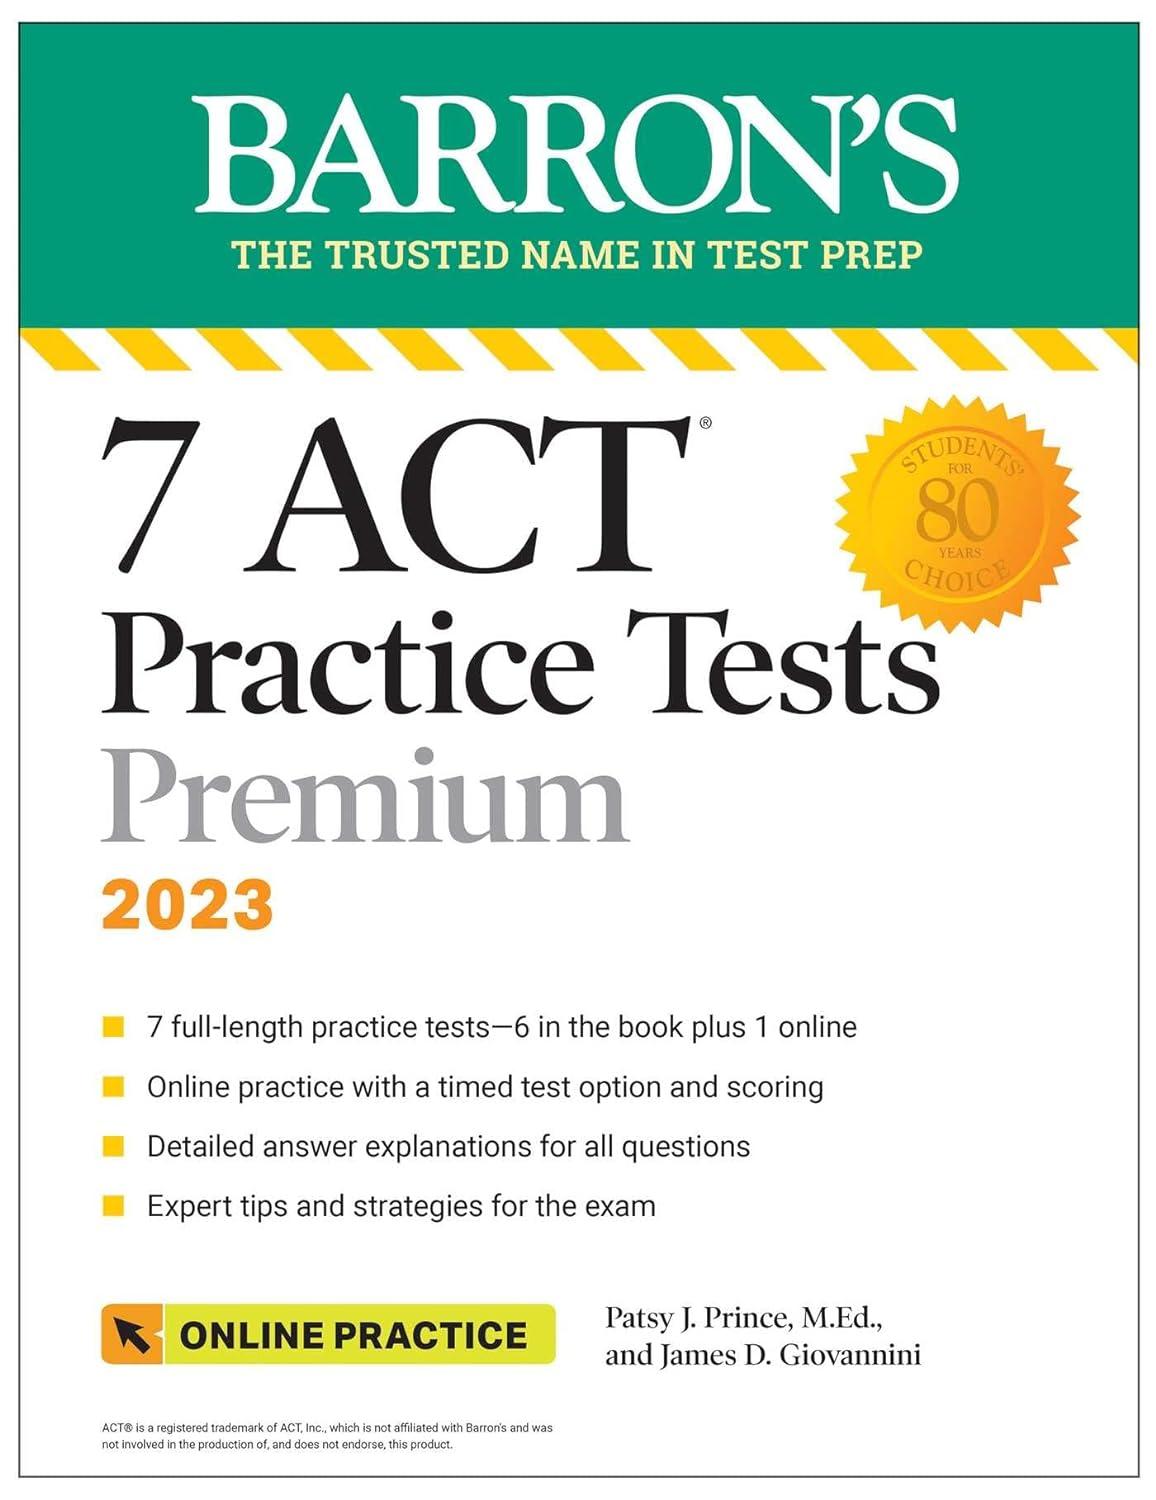 7 act practice tests premium 5th edition patsy j. prince m.ed., james d. giovannini 1506286356, 978-1506286358